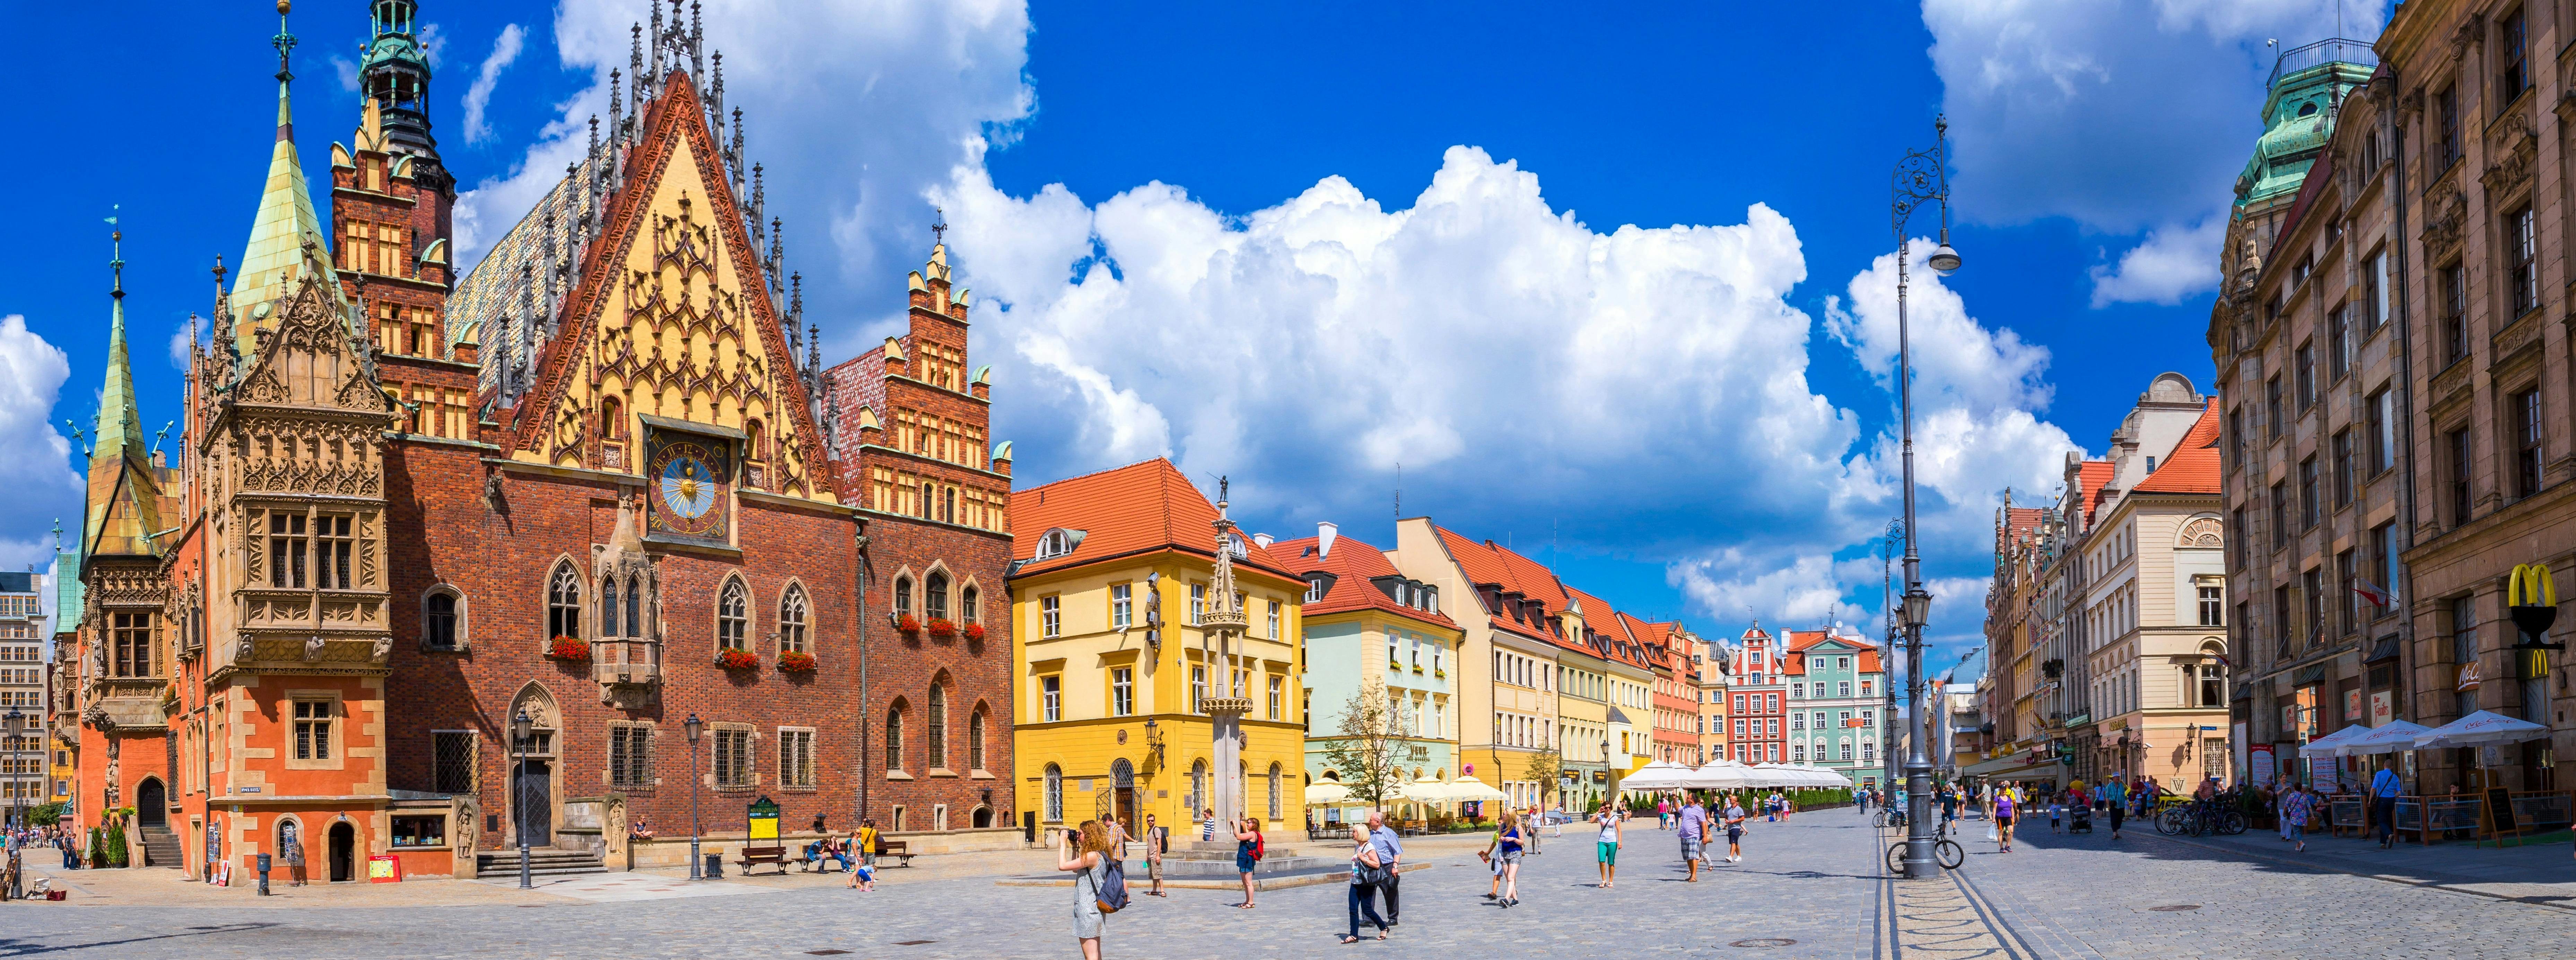 Wroclaw day tour in small group from Warsaw